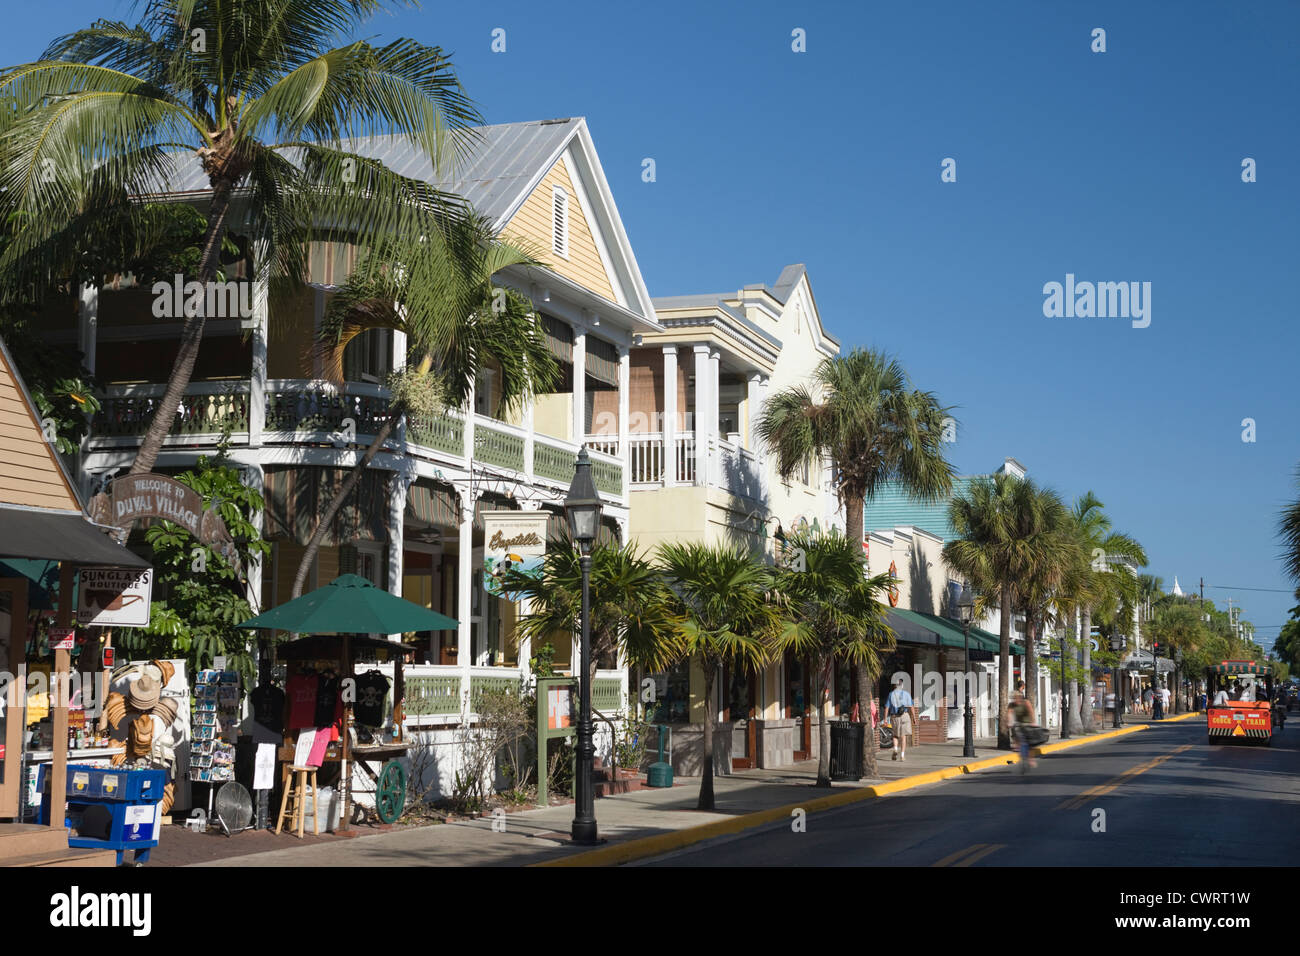 DUVAL STREET SHOPS KEY WEST OLD TOWN HISTORIC DISTRICT FLORIDA USA